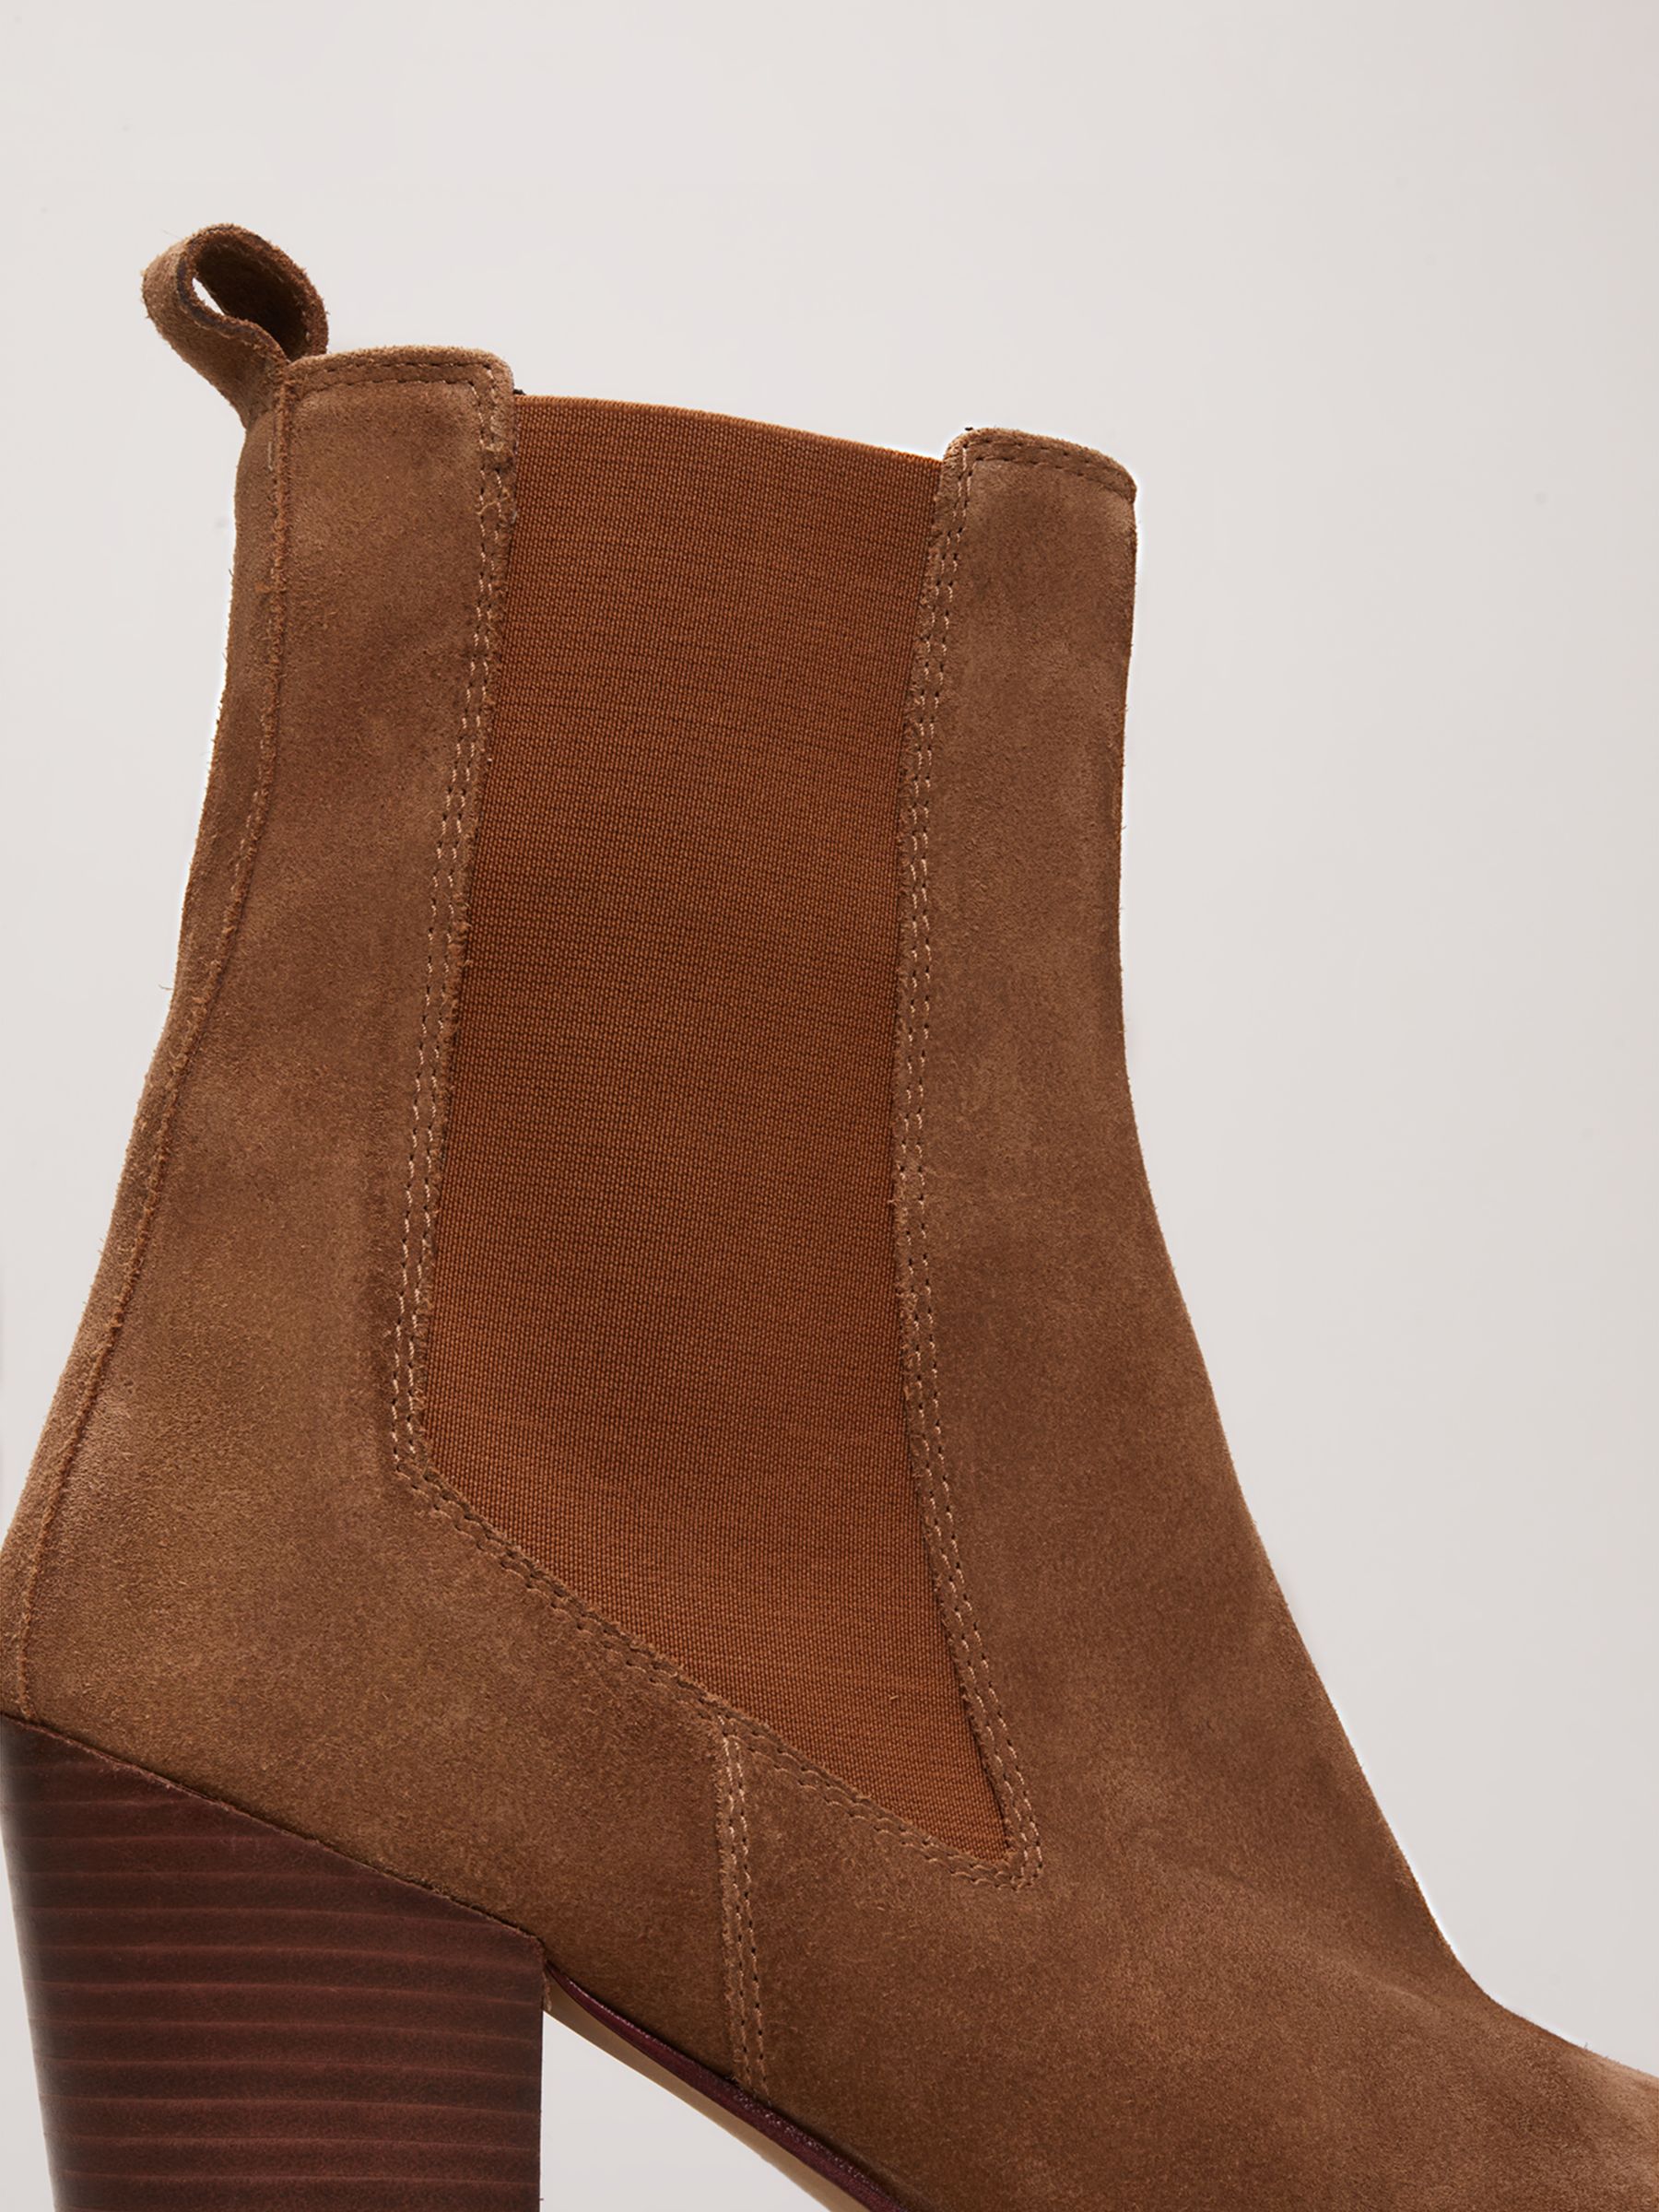 Phase Eight Suede Cowboy Boots, Tan, EU40